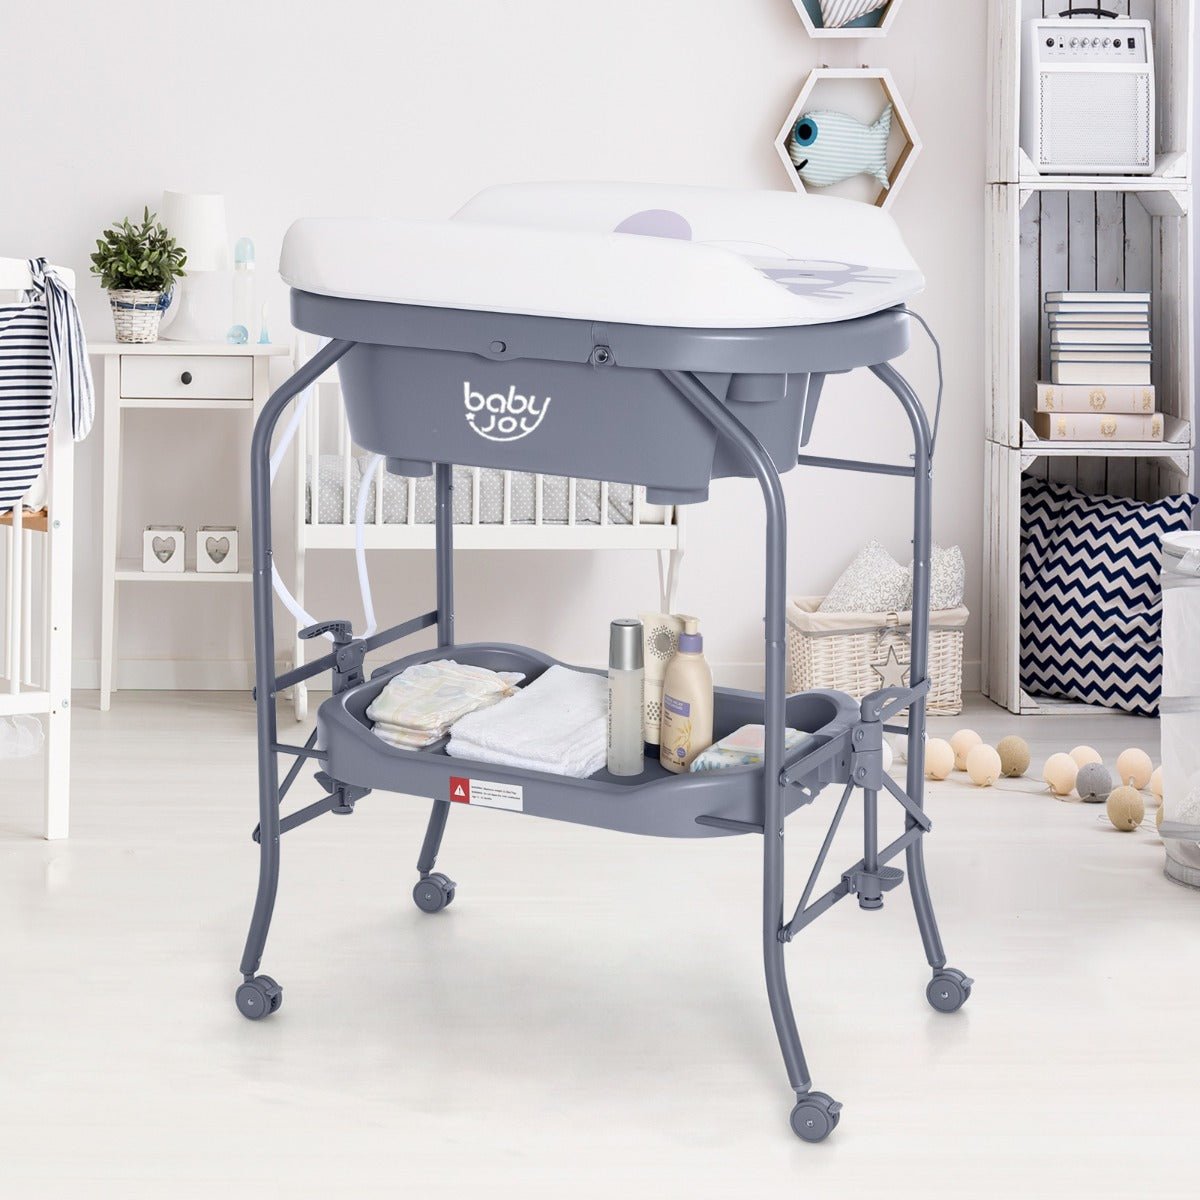 Buy the Ultimate 2 in 1 Baby Changing Table for Infant Care